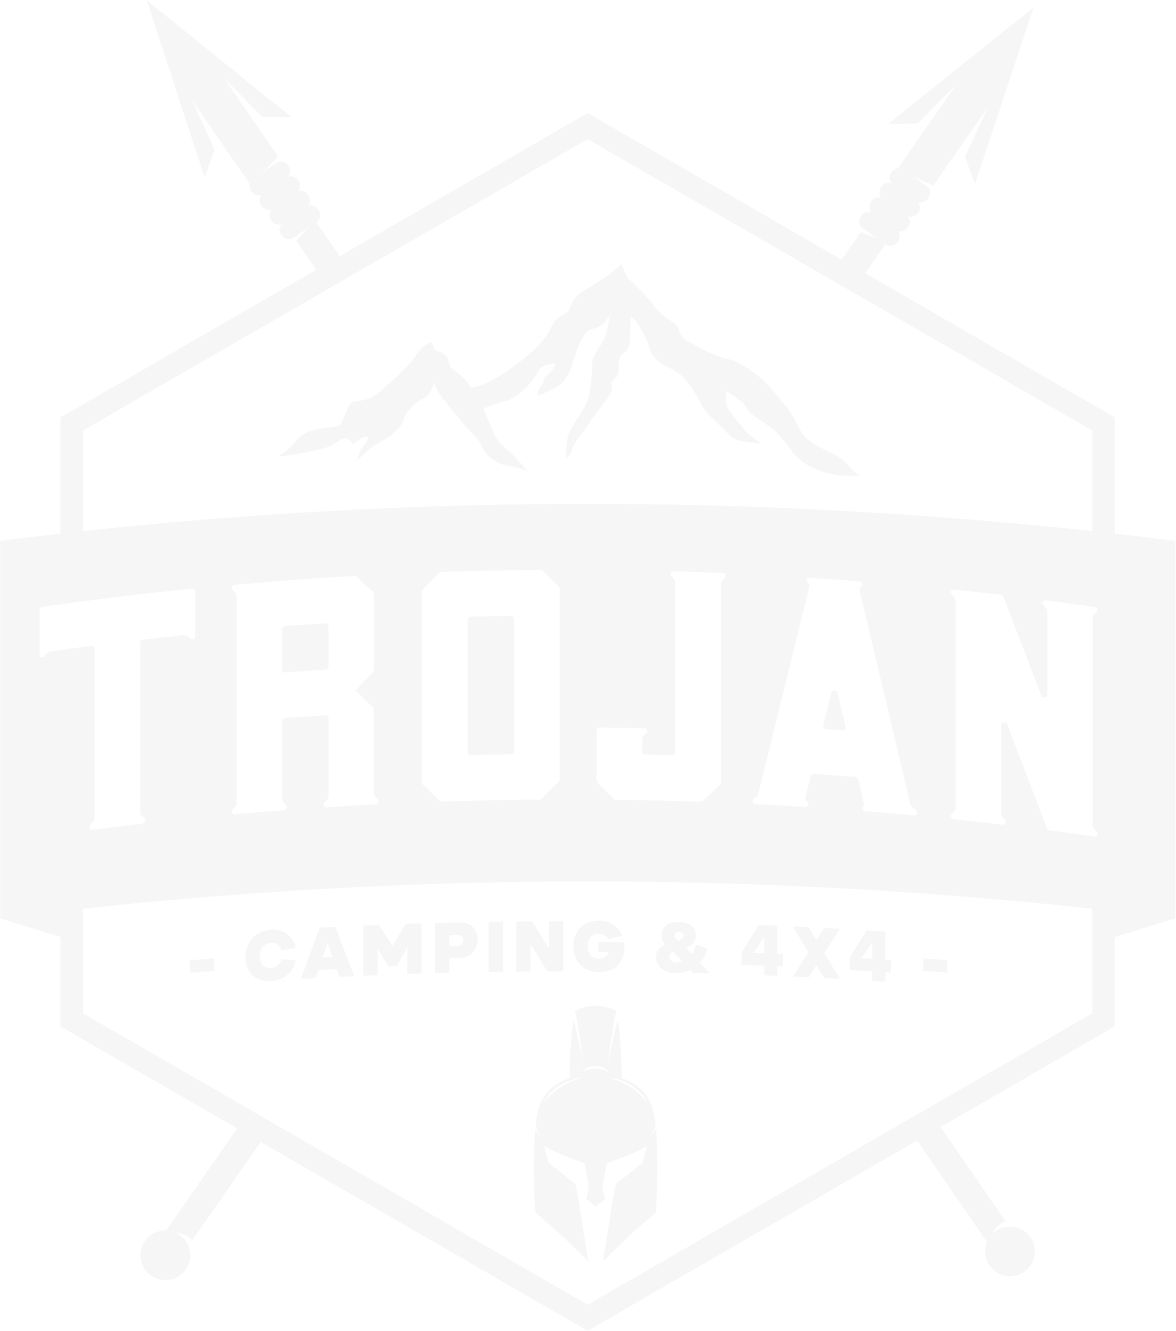 Trojan Camping and 4x4